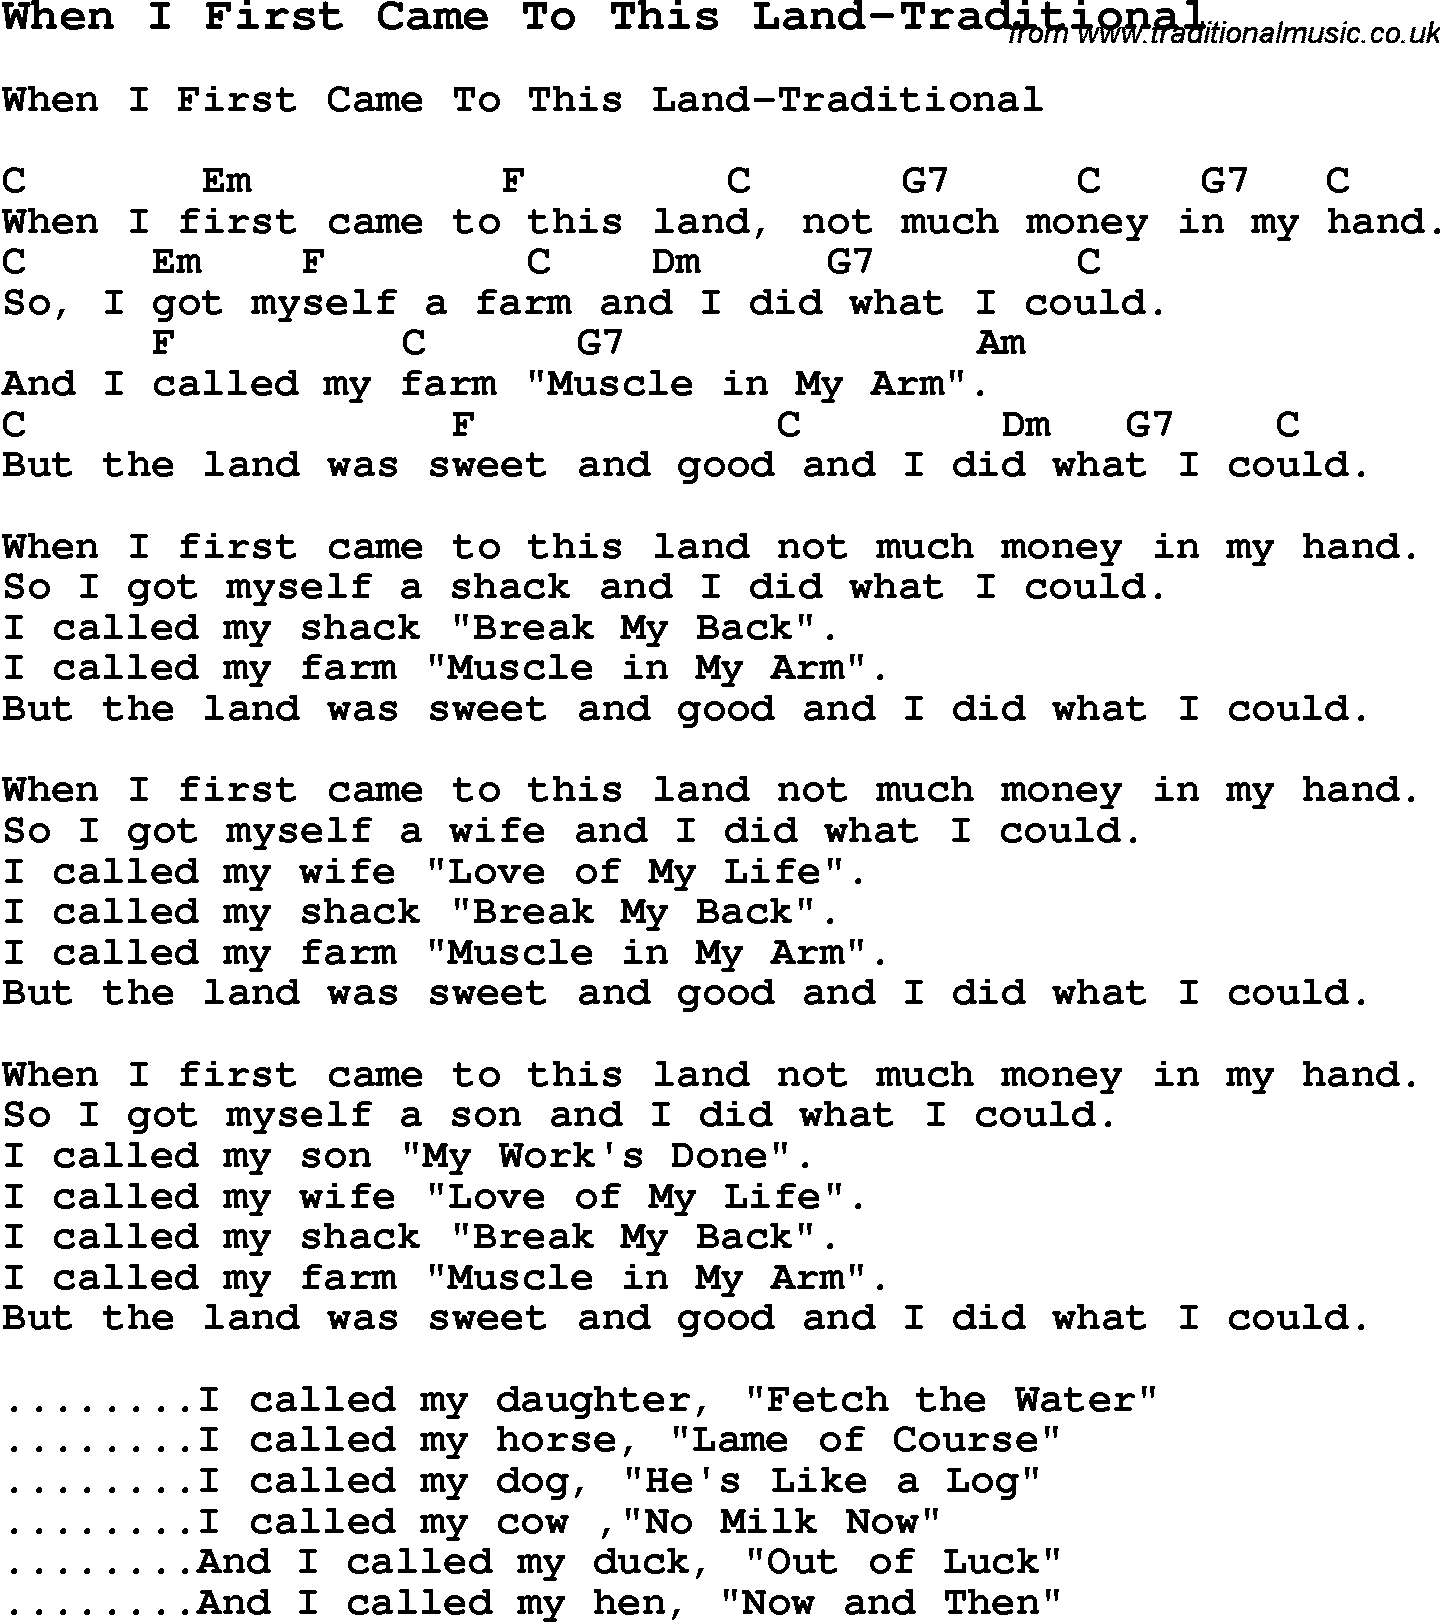 Summer-Camp Song, When I First Came To This Land-Traditional, with lyrics and chords for Ukulele, Guitar Banjo etc.